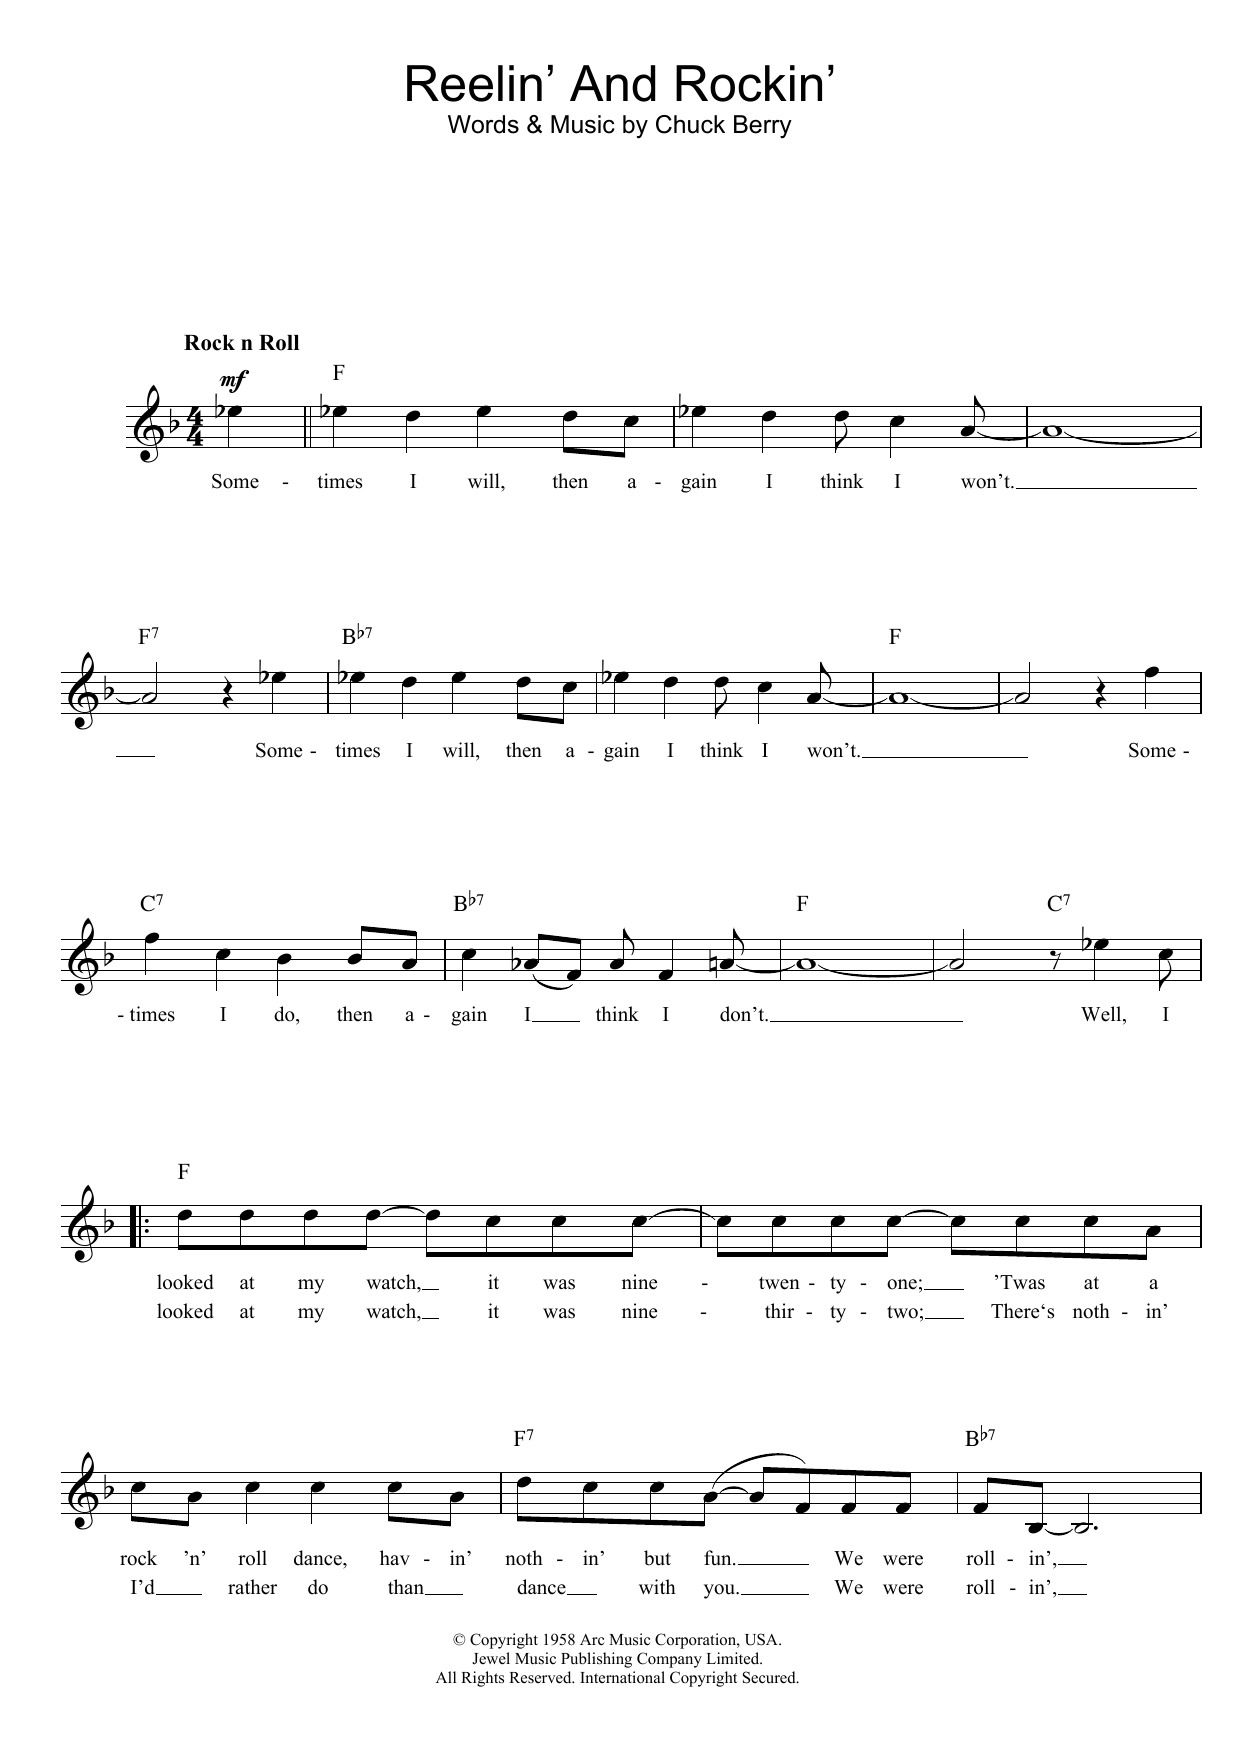 Chuck Berry Reelin' And Rockin' sheet music notes and chords. Download Printable PDF.